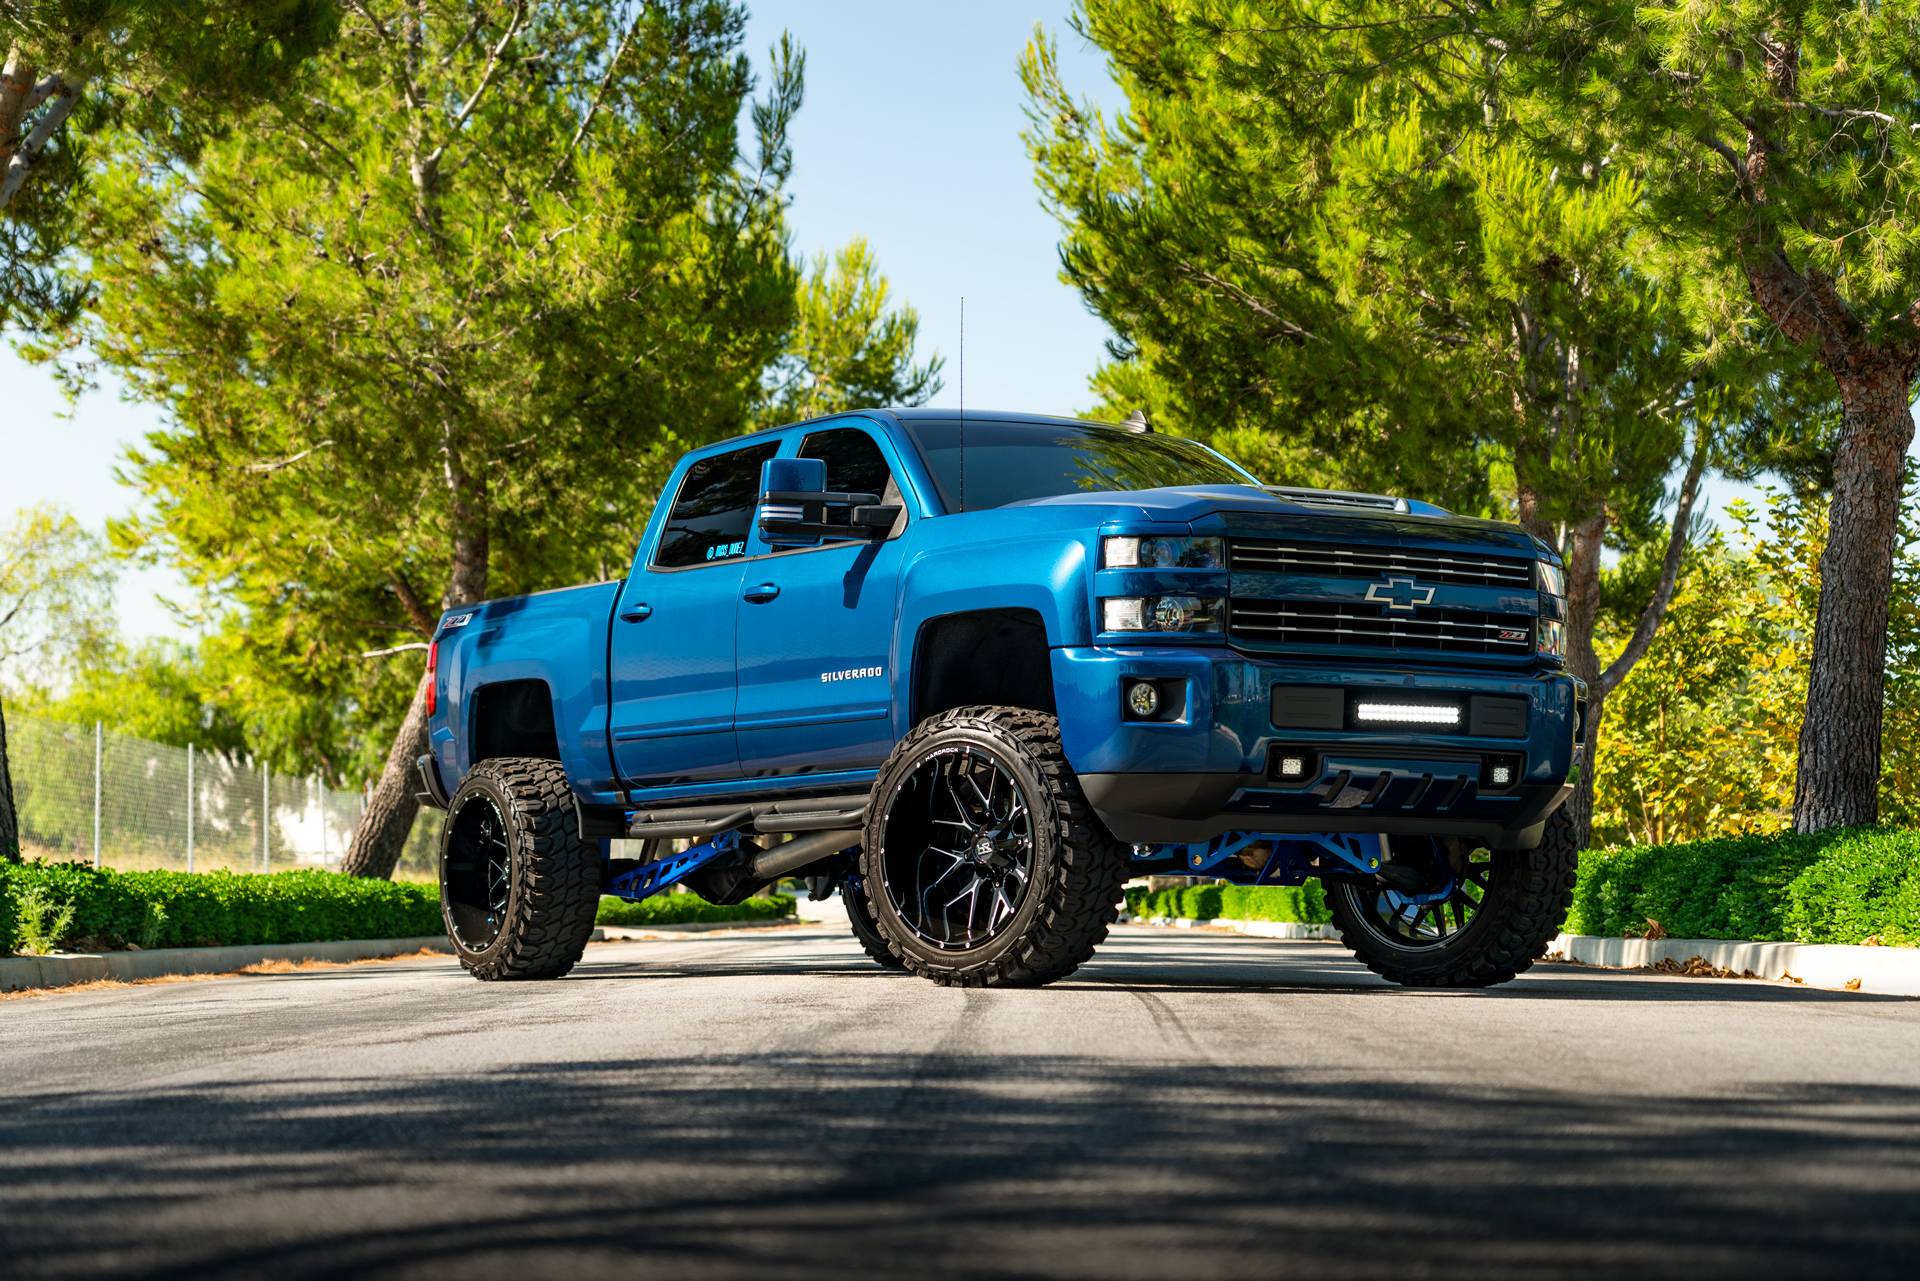 HardRock Offroad Aftermarket Offroad Wheels On a Lifted Chevy Silverado